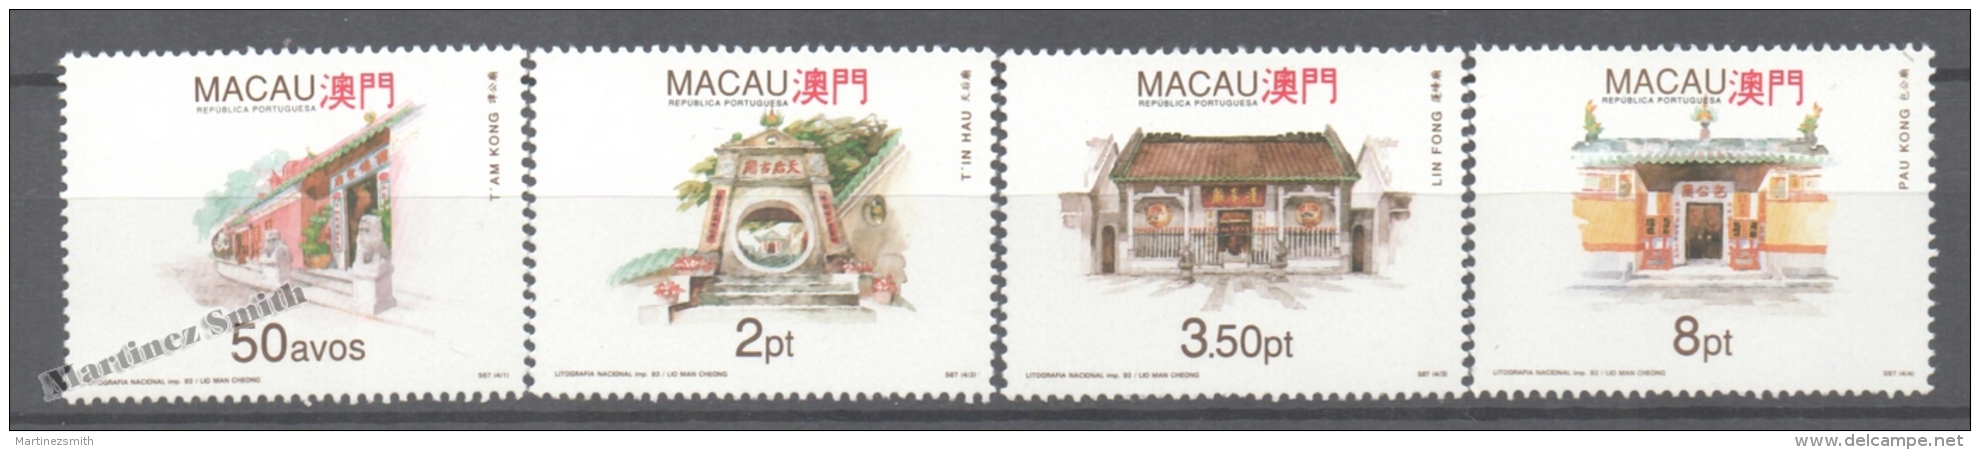 Macao 1993 Yvert 677-80, Temples Of Macao - MNH - Ungebraucht